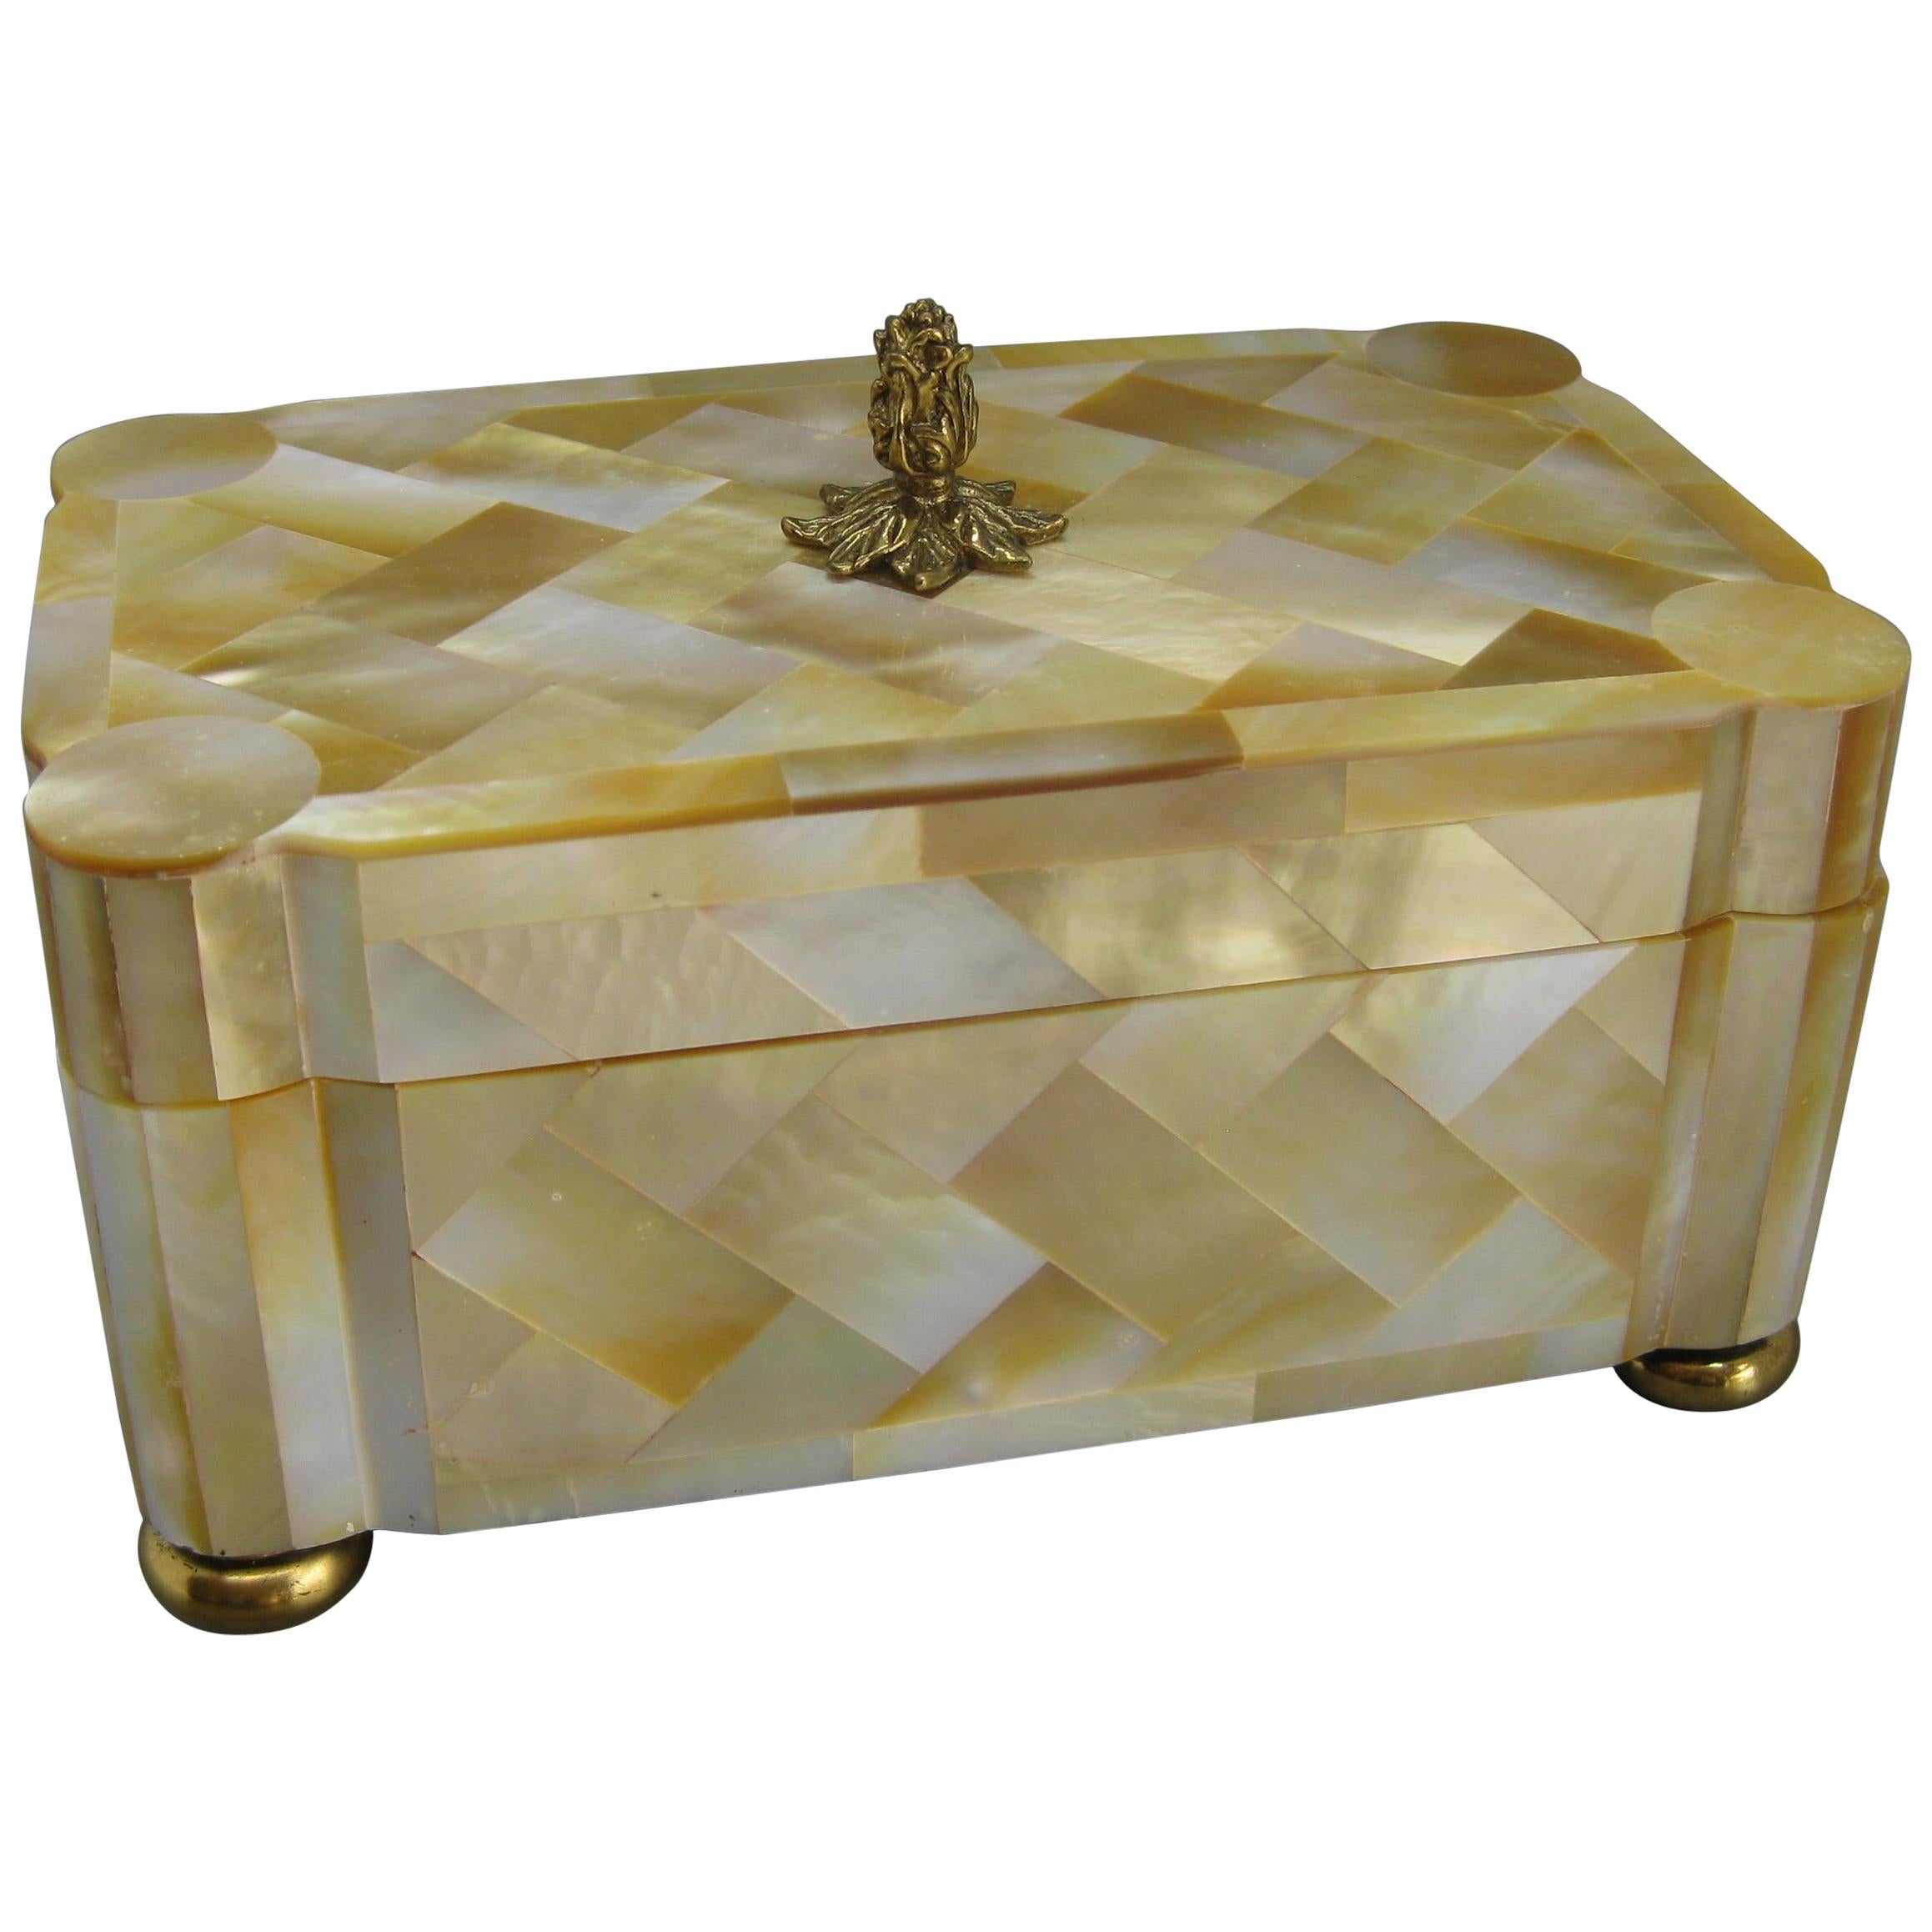 Maitland Smith Mother of Pearl and Brass Tessellated Decorative Wood Stash Box